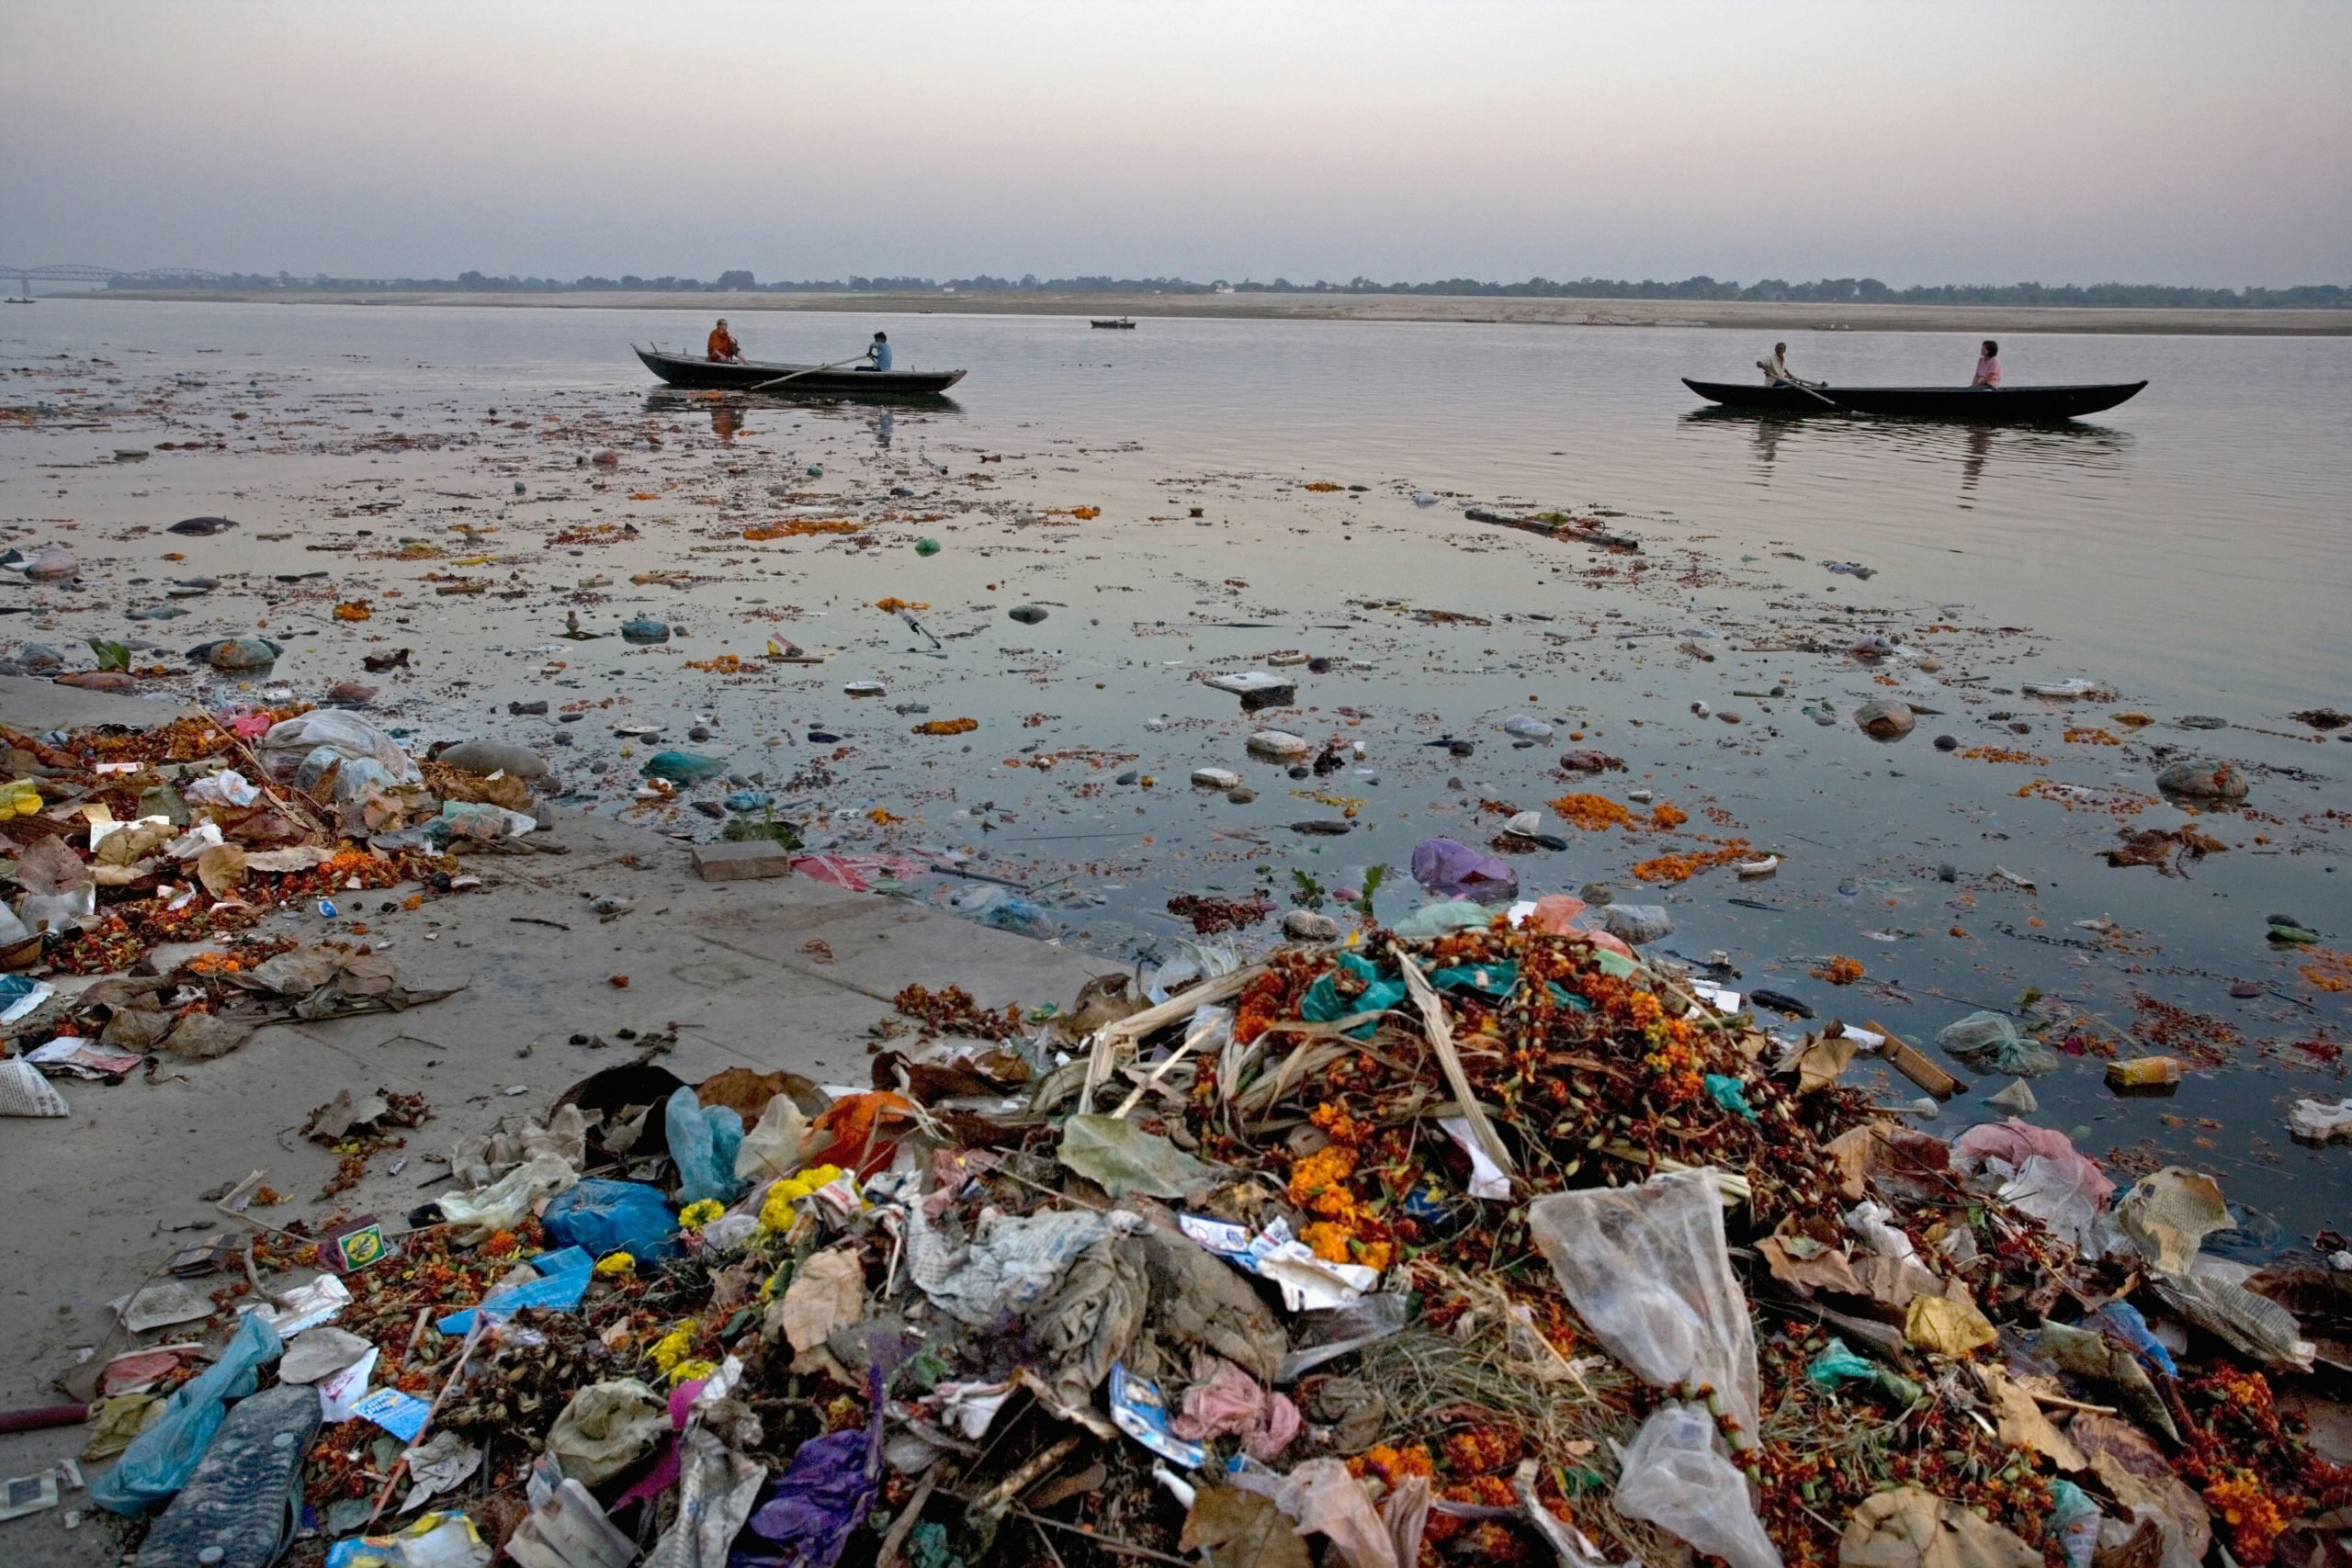 where are our scientists in the ganga plan?